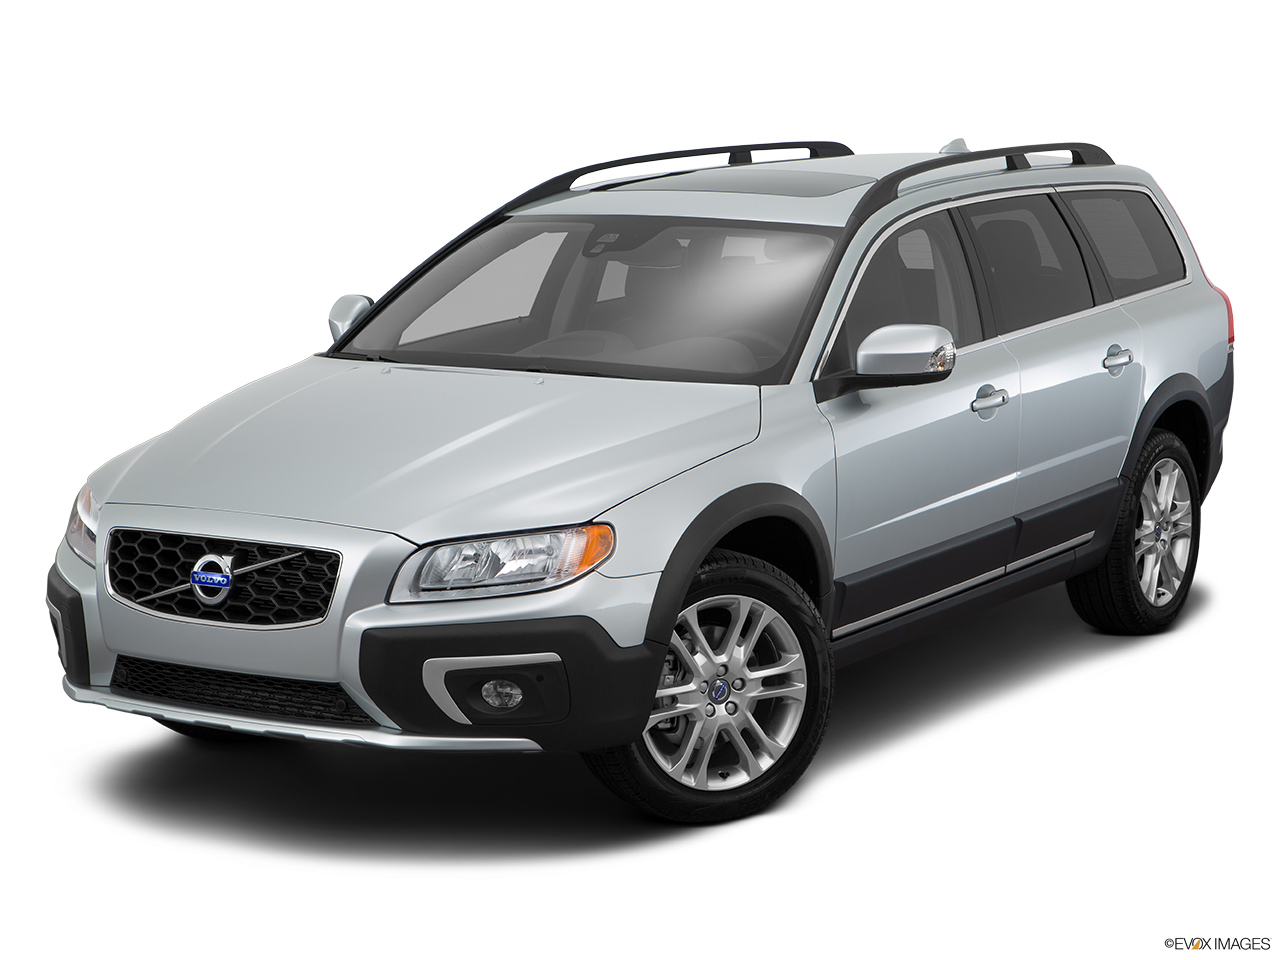 2016 Volvo XC70 T5 AWD Premier Front angle view. 